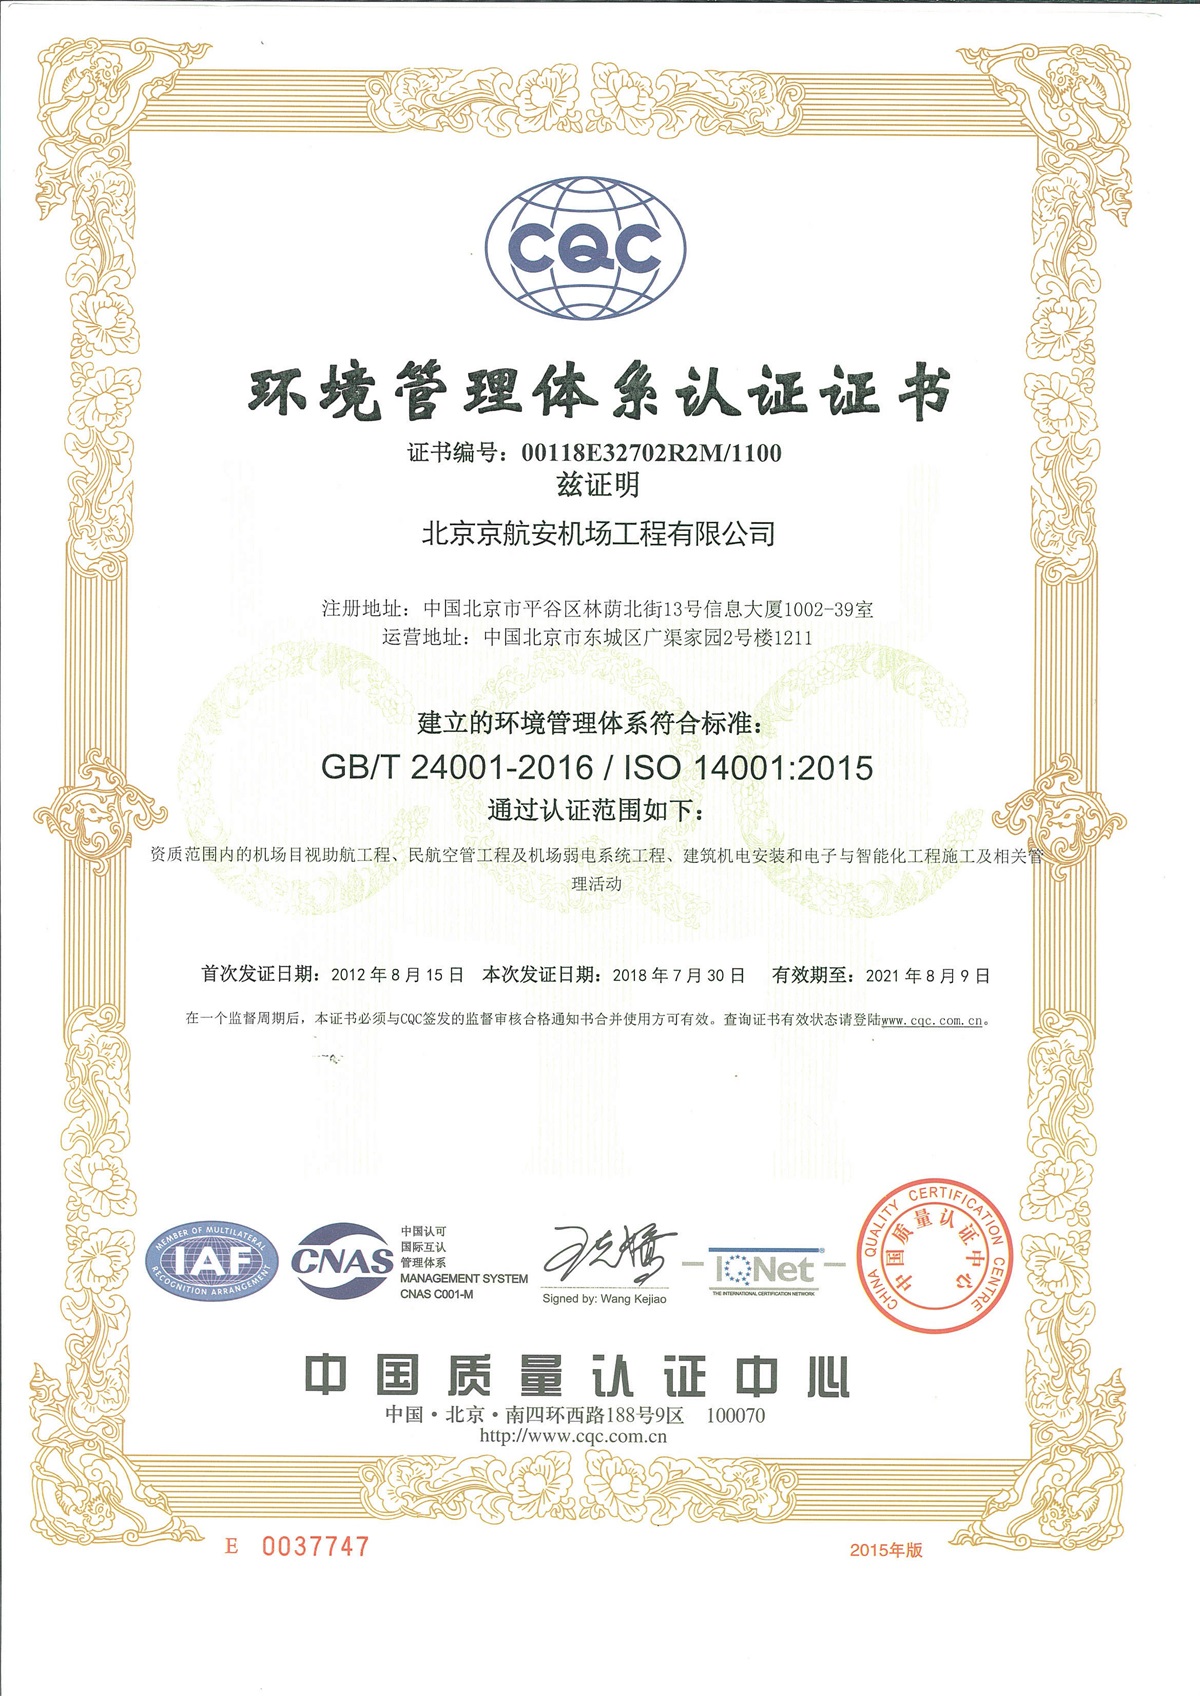 Certification of Environmental Management System